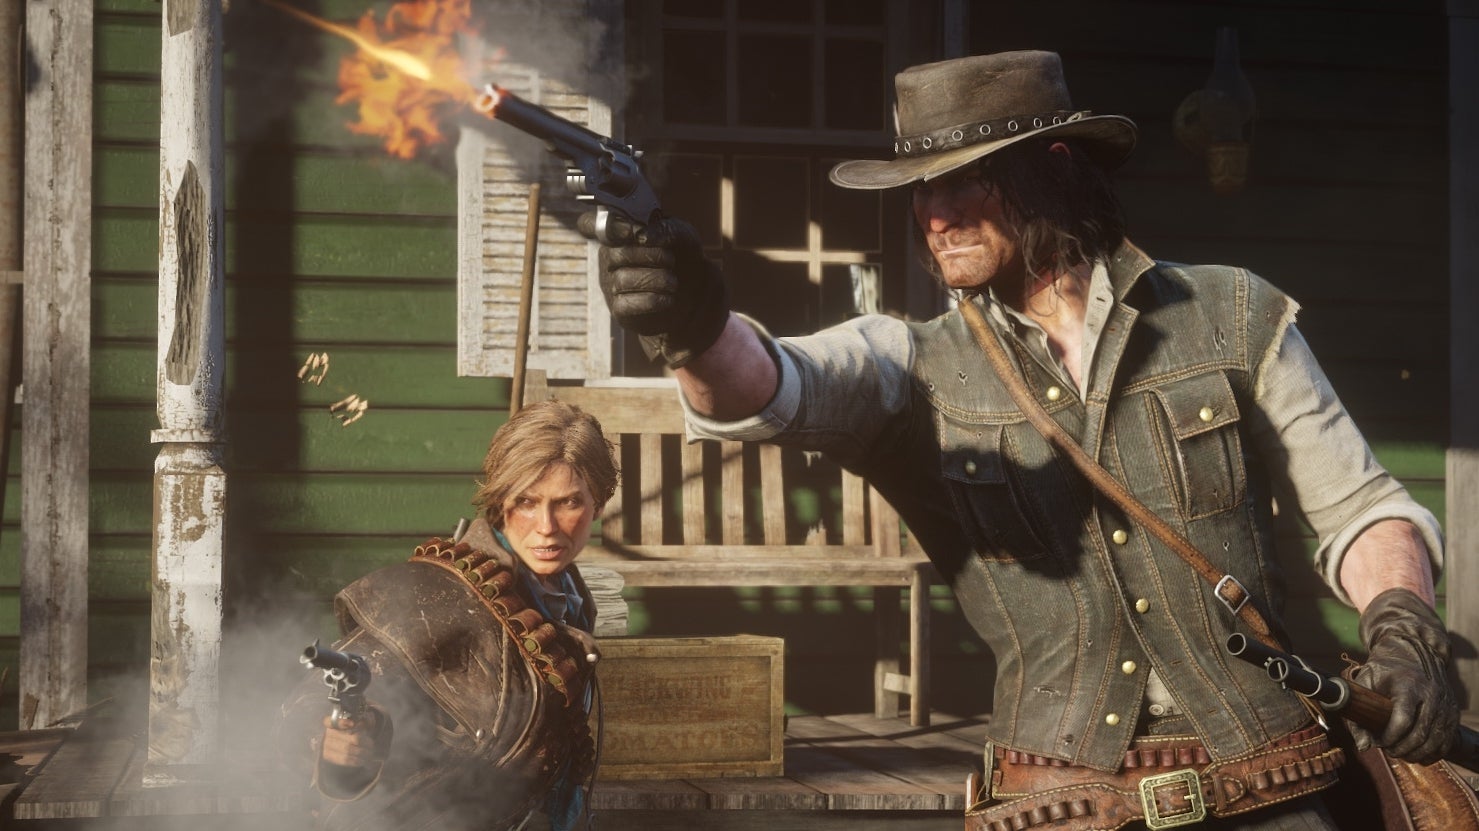 Teknologi asiatisk teenagere Red Dead Redemption 2 looks and plays best on Xbox One X | Eurogamer.net